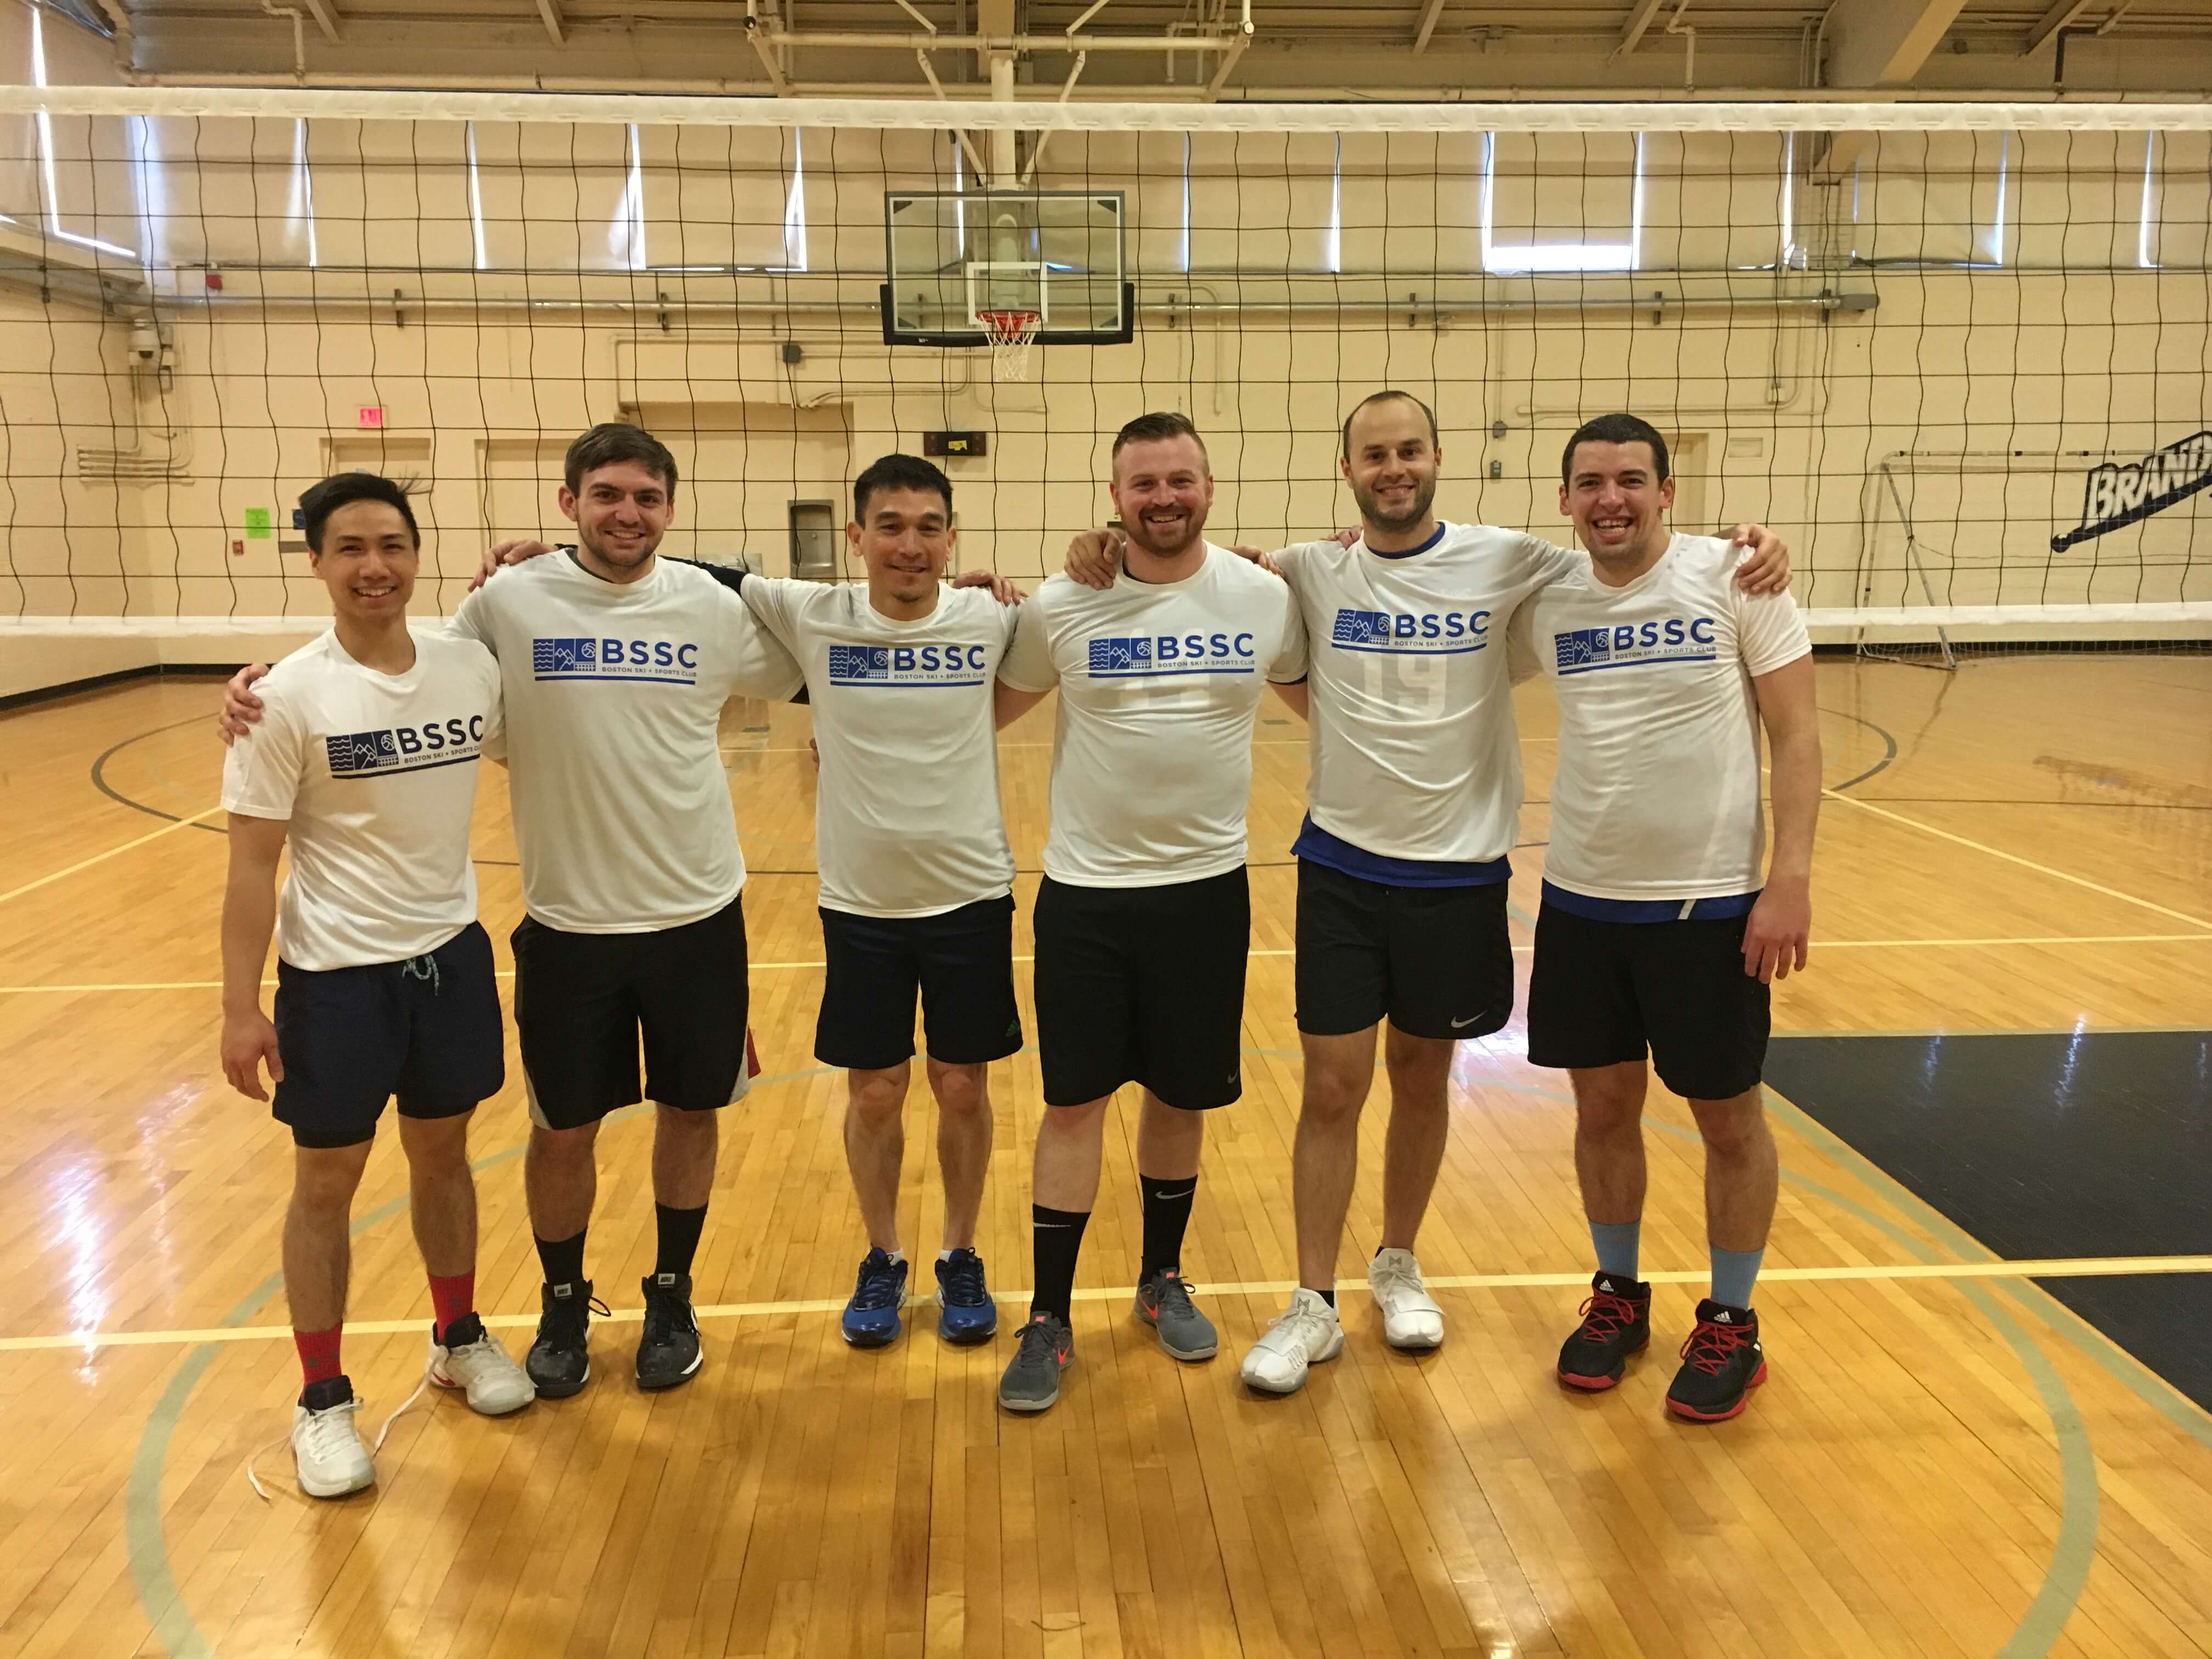 3/31/18 Big Dig defeats March Madness to win MC at Brandeis